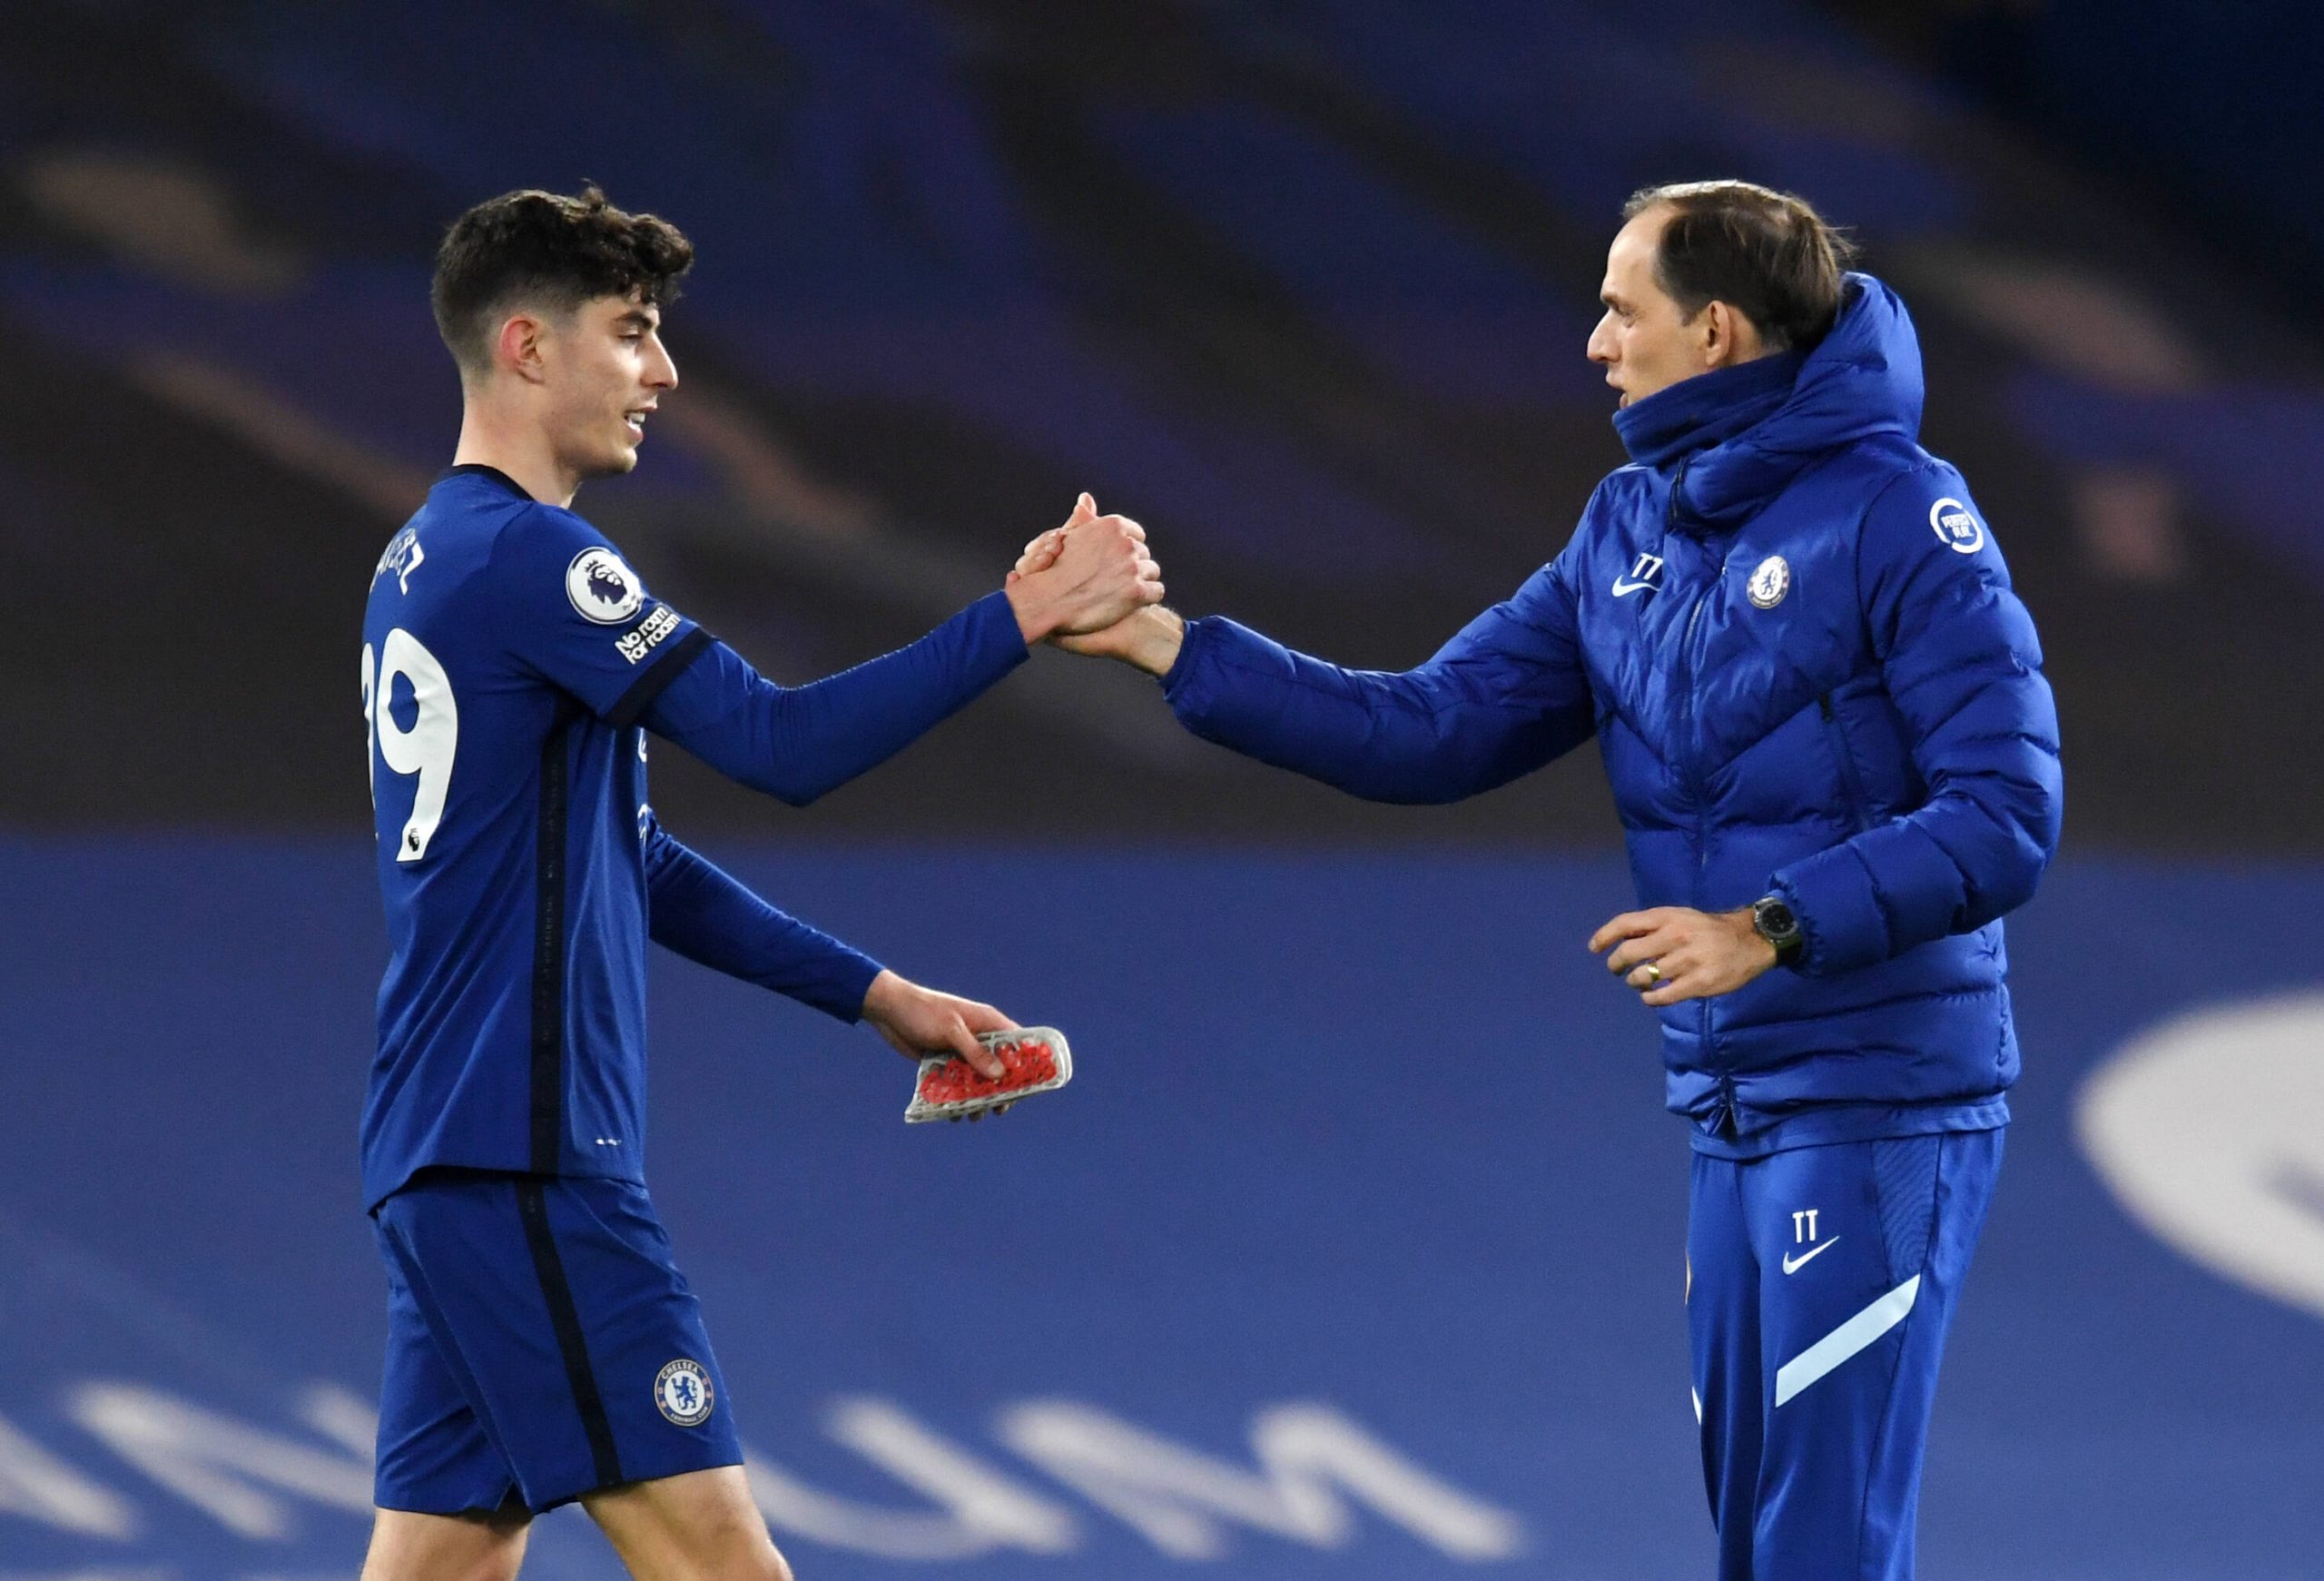 Kai Havertz has looked good in the No.9 role for Chelsea.